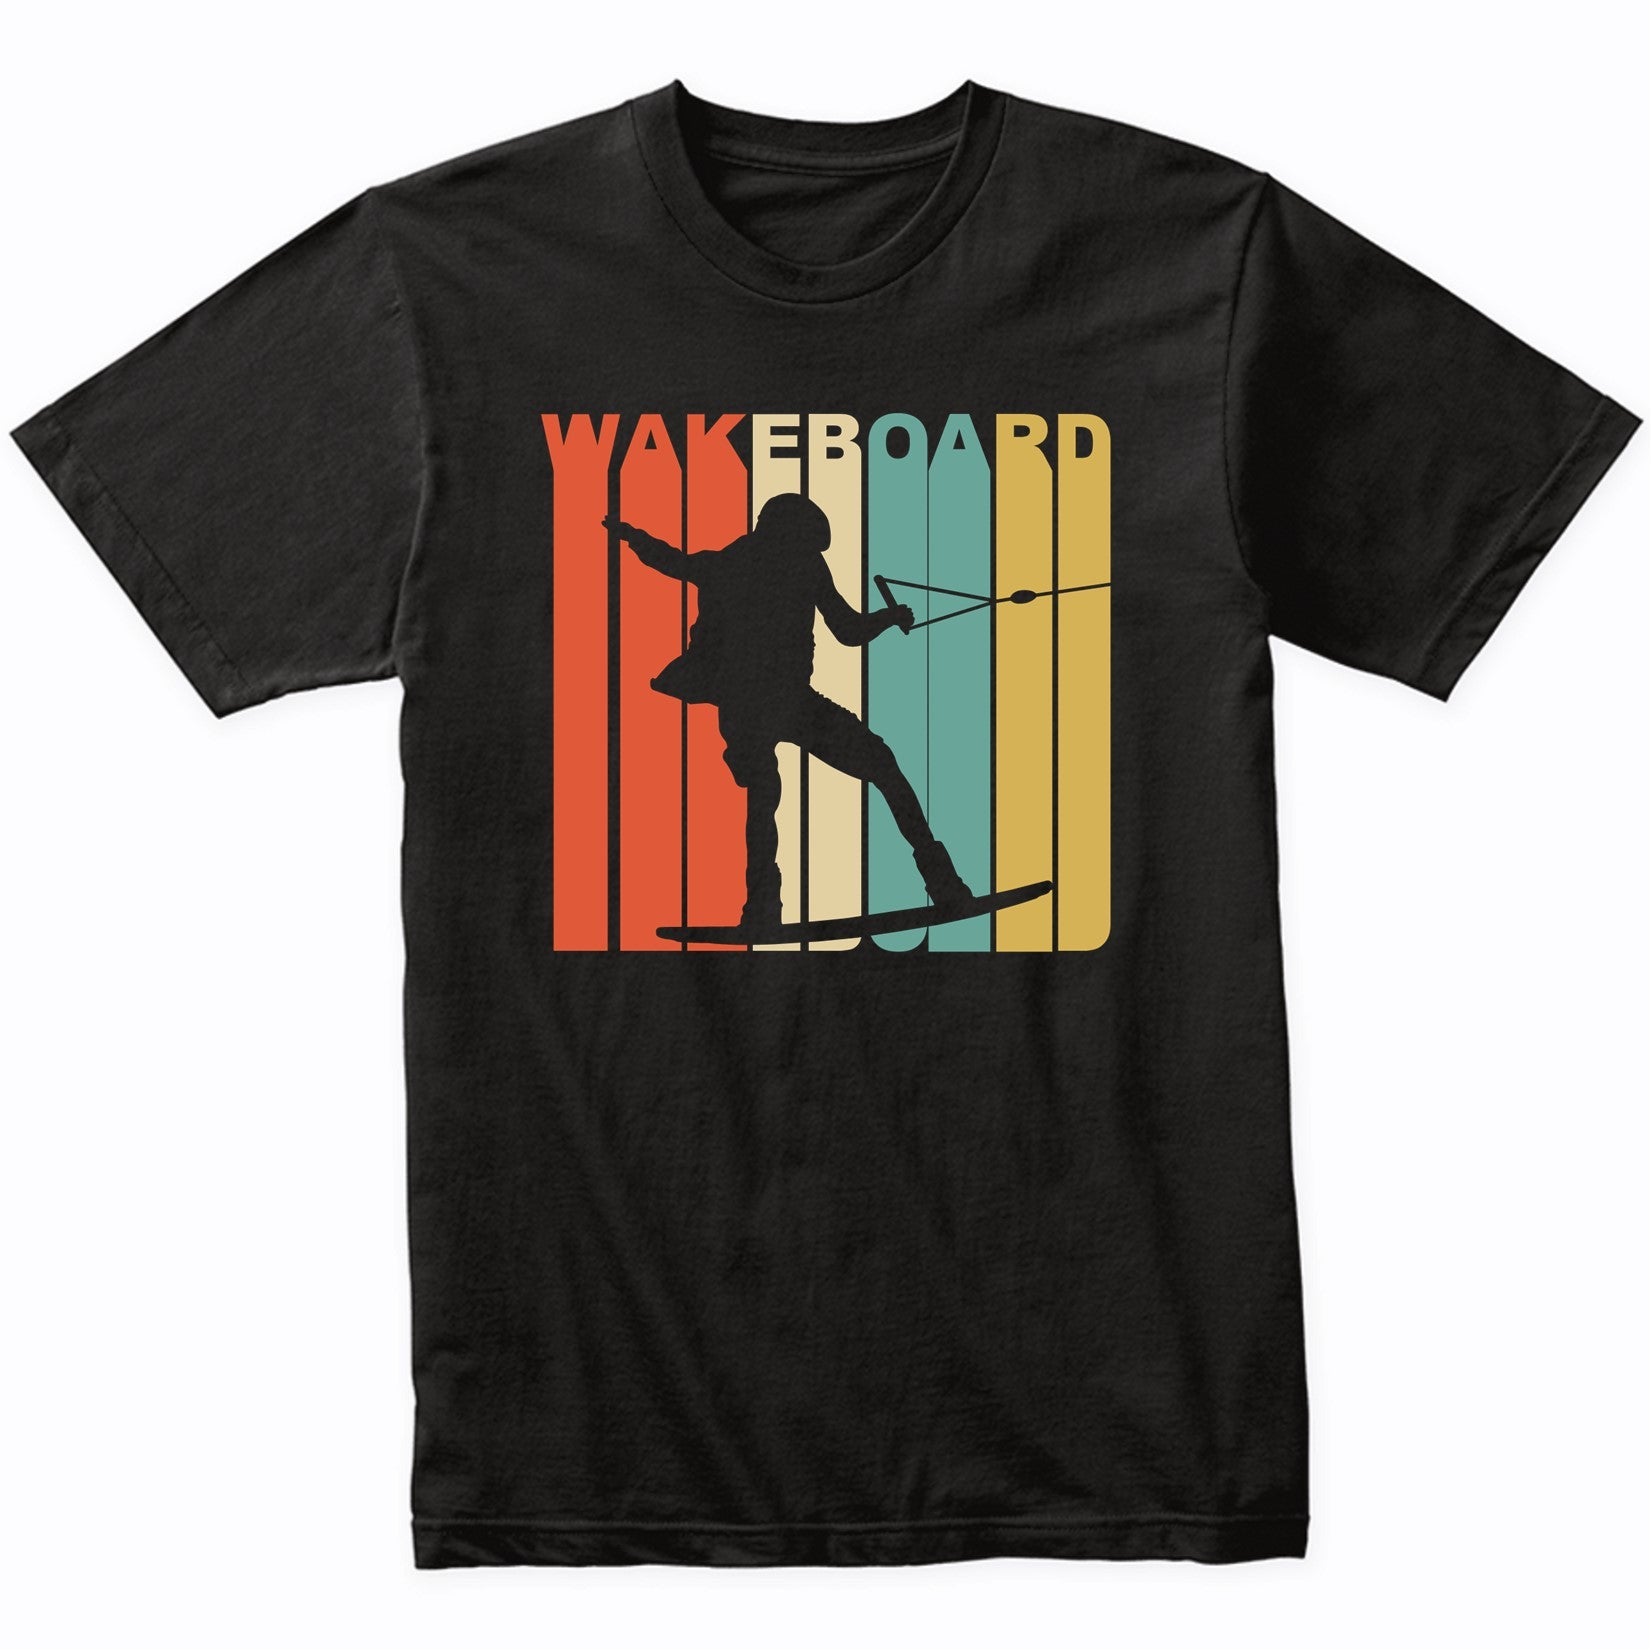 Retro 1970's Style Wakeboarder Silhouette Wakeboarding Shirt